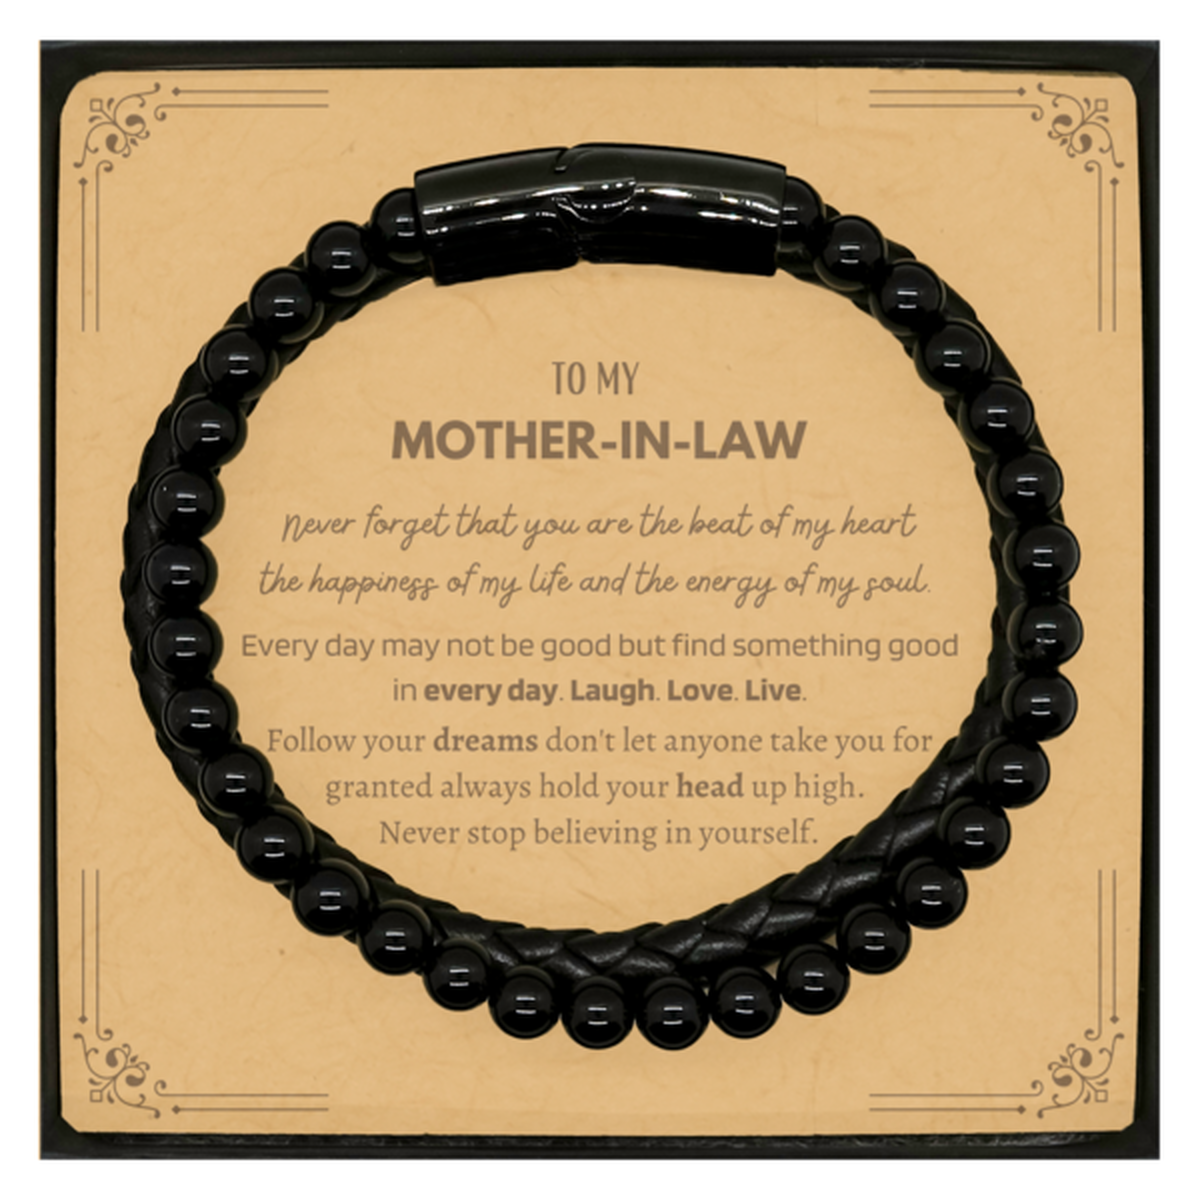 To My Mother-In-Law Message Card Gifts, Christmas Mother-In-Law Stone Leather Bracelets Present, Birthday Unique Motivational For Mother-In-Law, To My Mother-In-Law Never forget that you are the beat of my heart the happiness of my life and the energy of